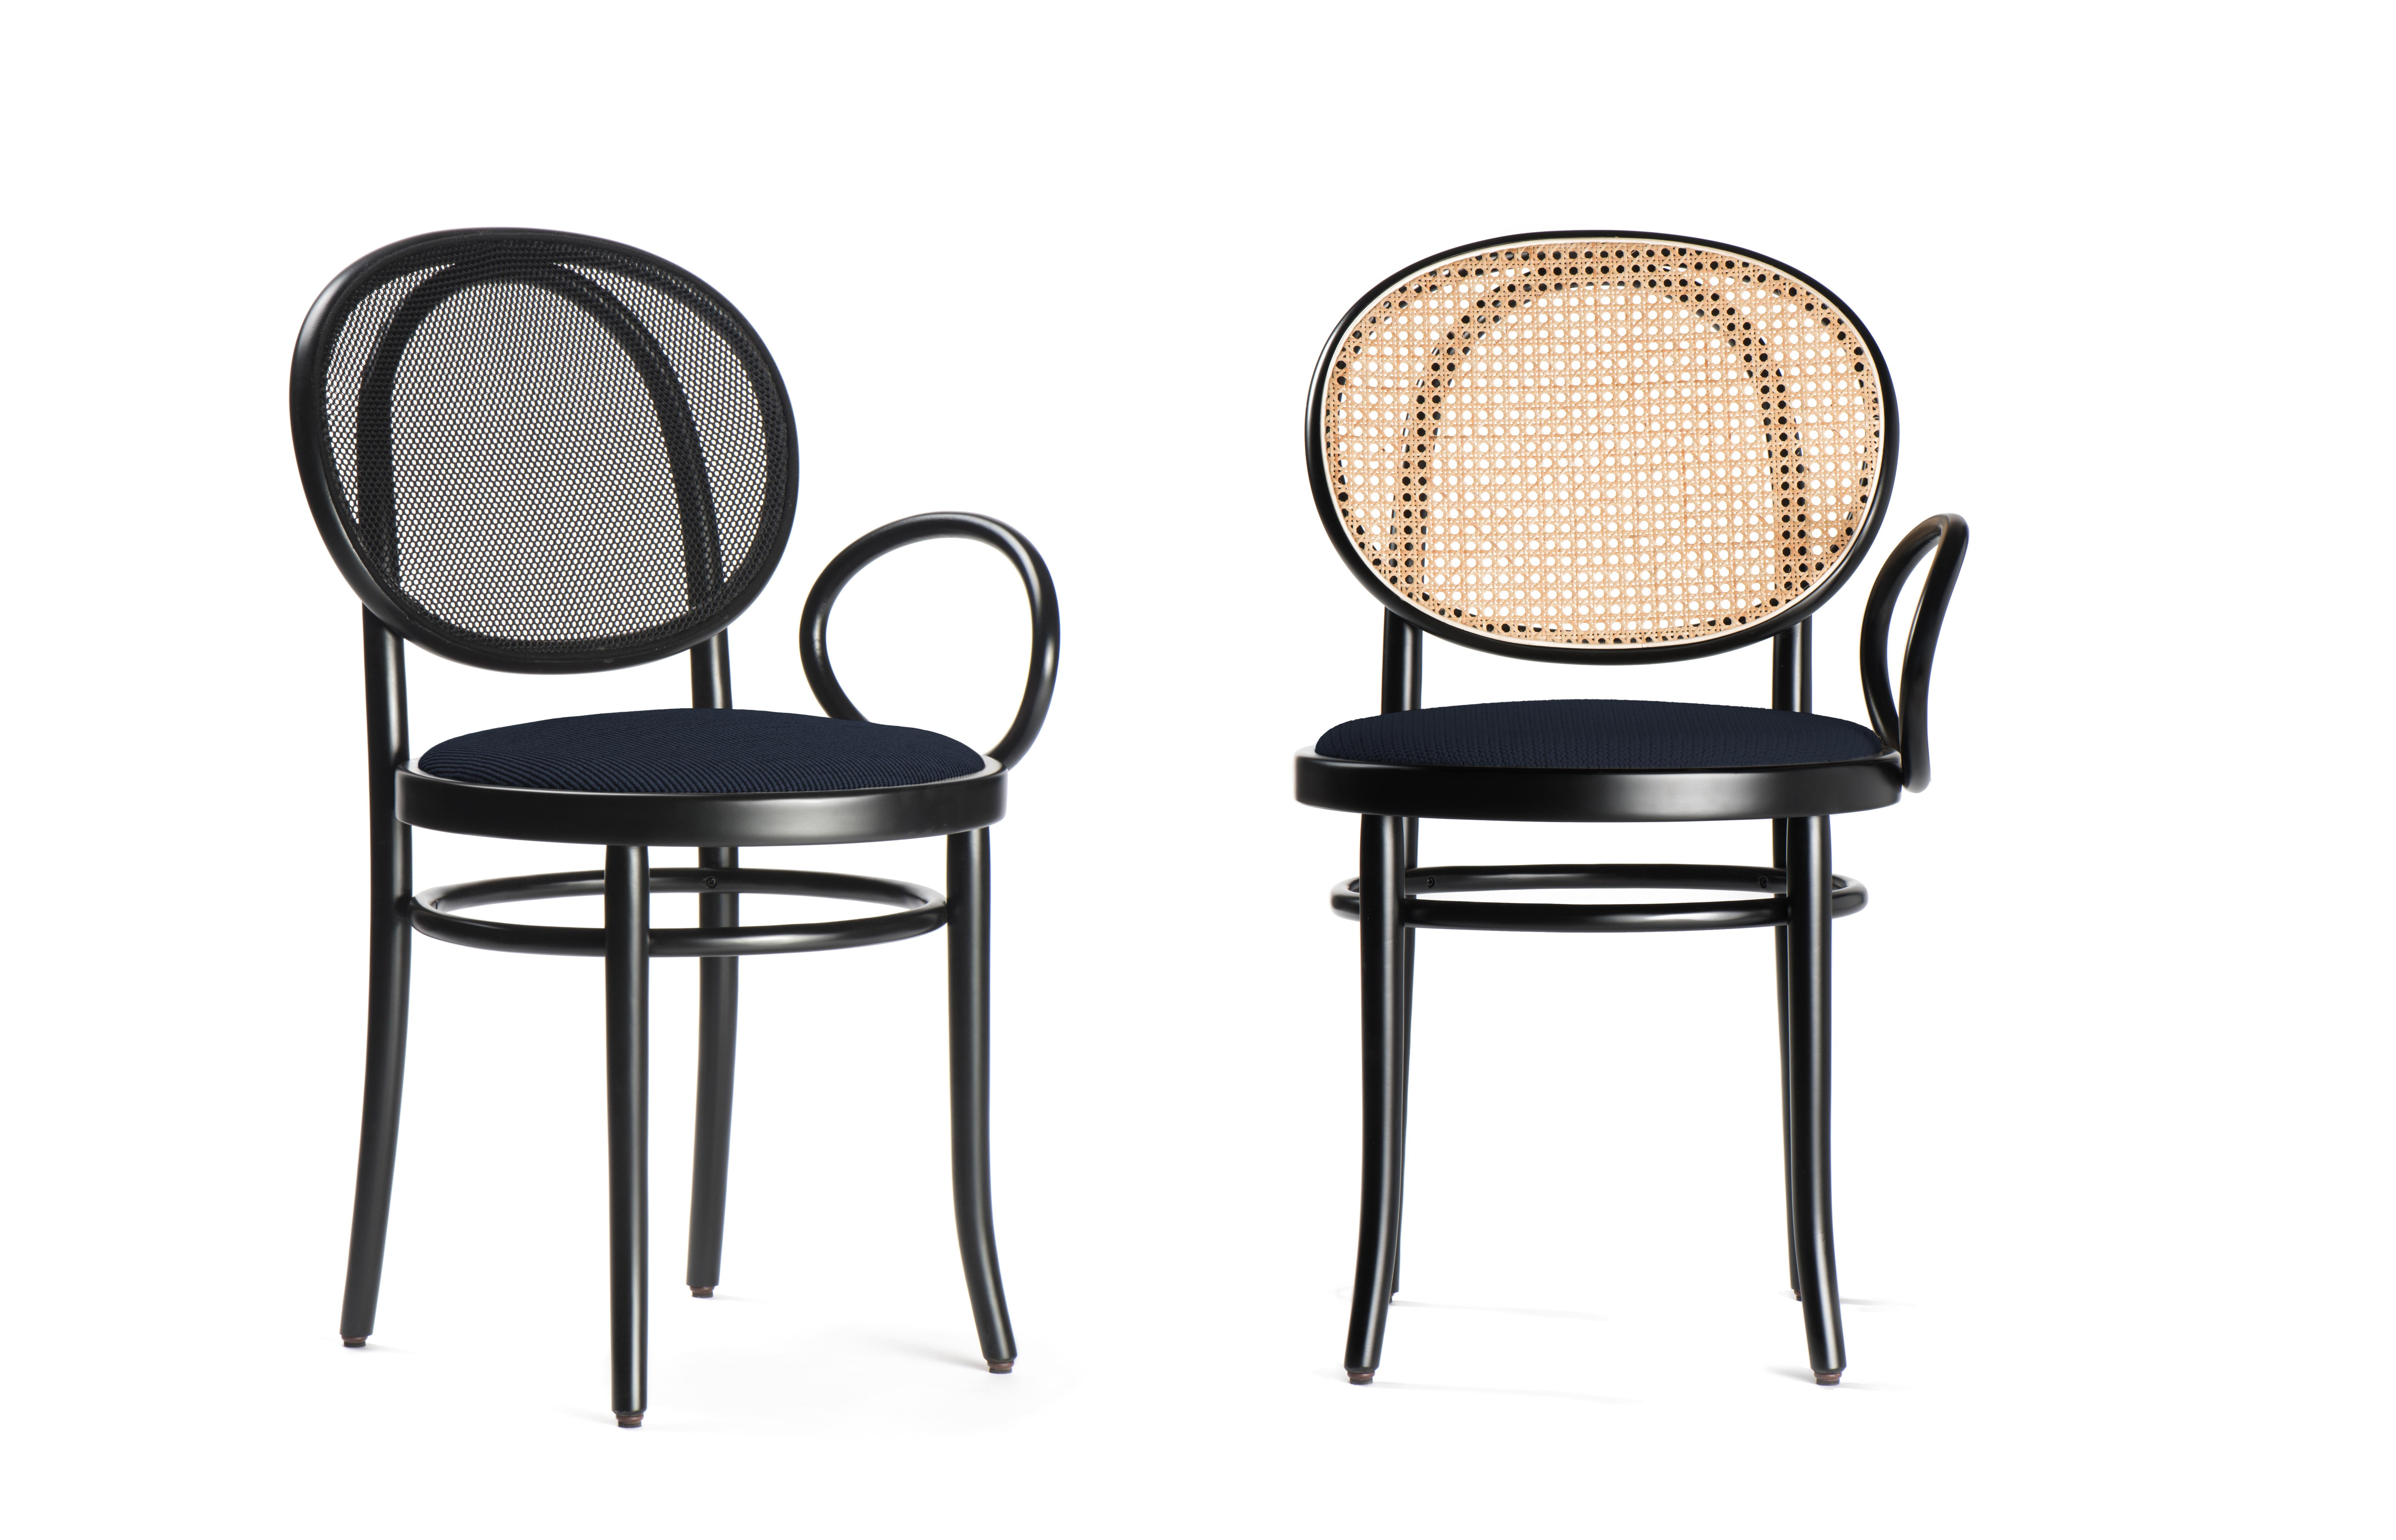 Gebrüder Thonet Vienna GmbH N.0 Single Armrest Black Chair in  Mesh Backrest In New Condition For Sale In Brooklyn, NY